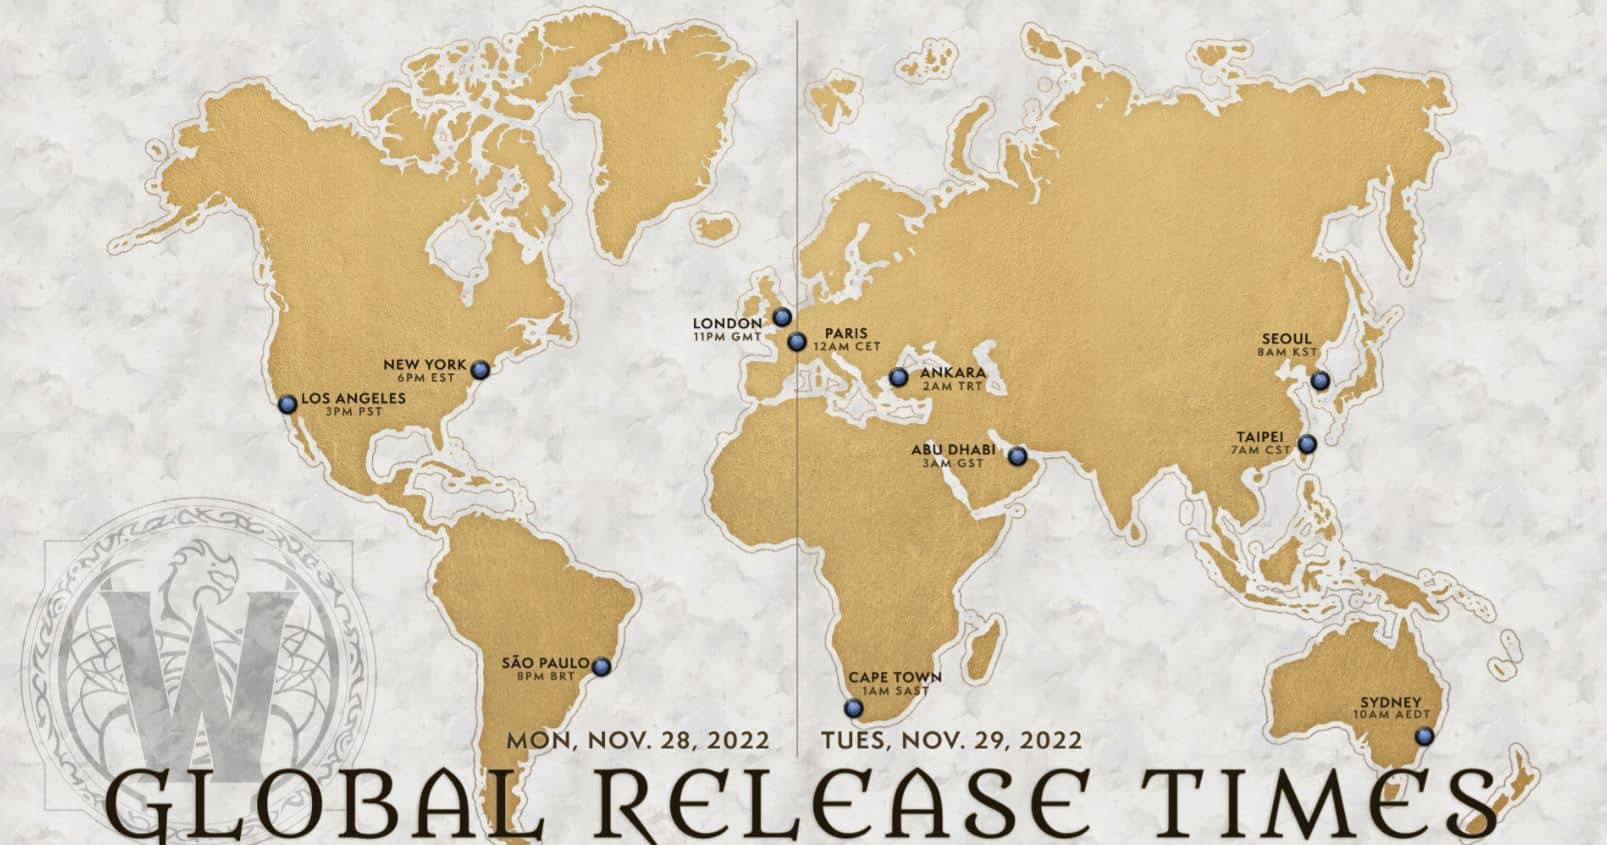 Dragonflight release time map